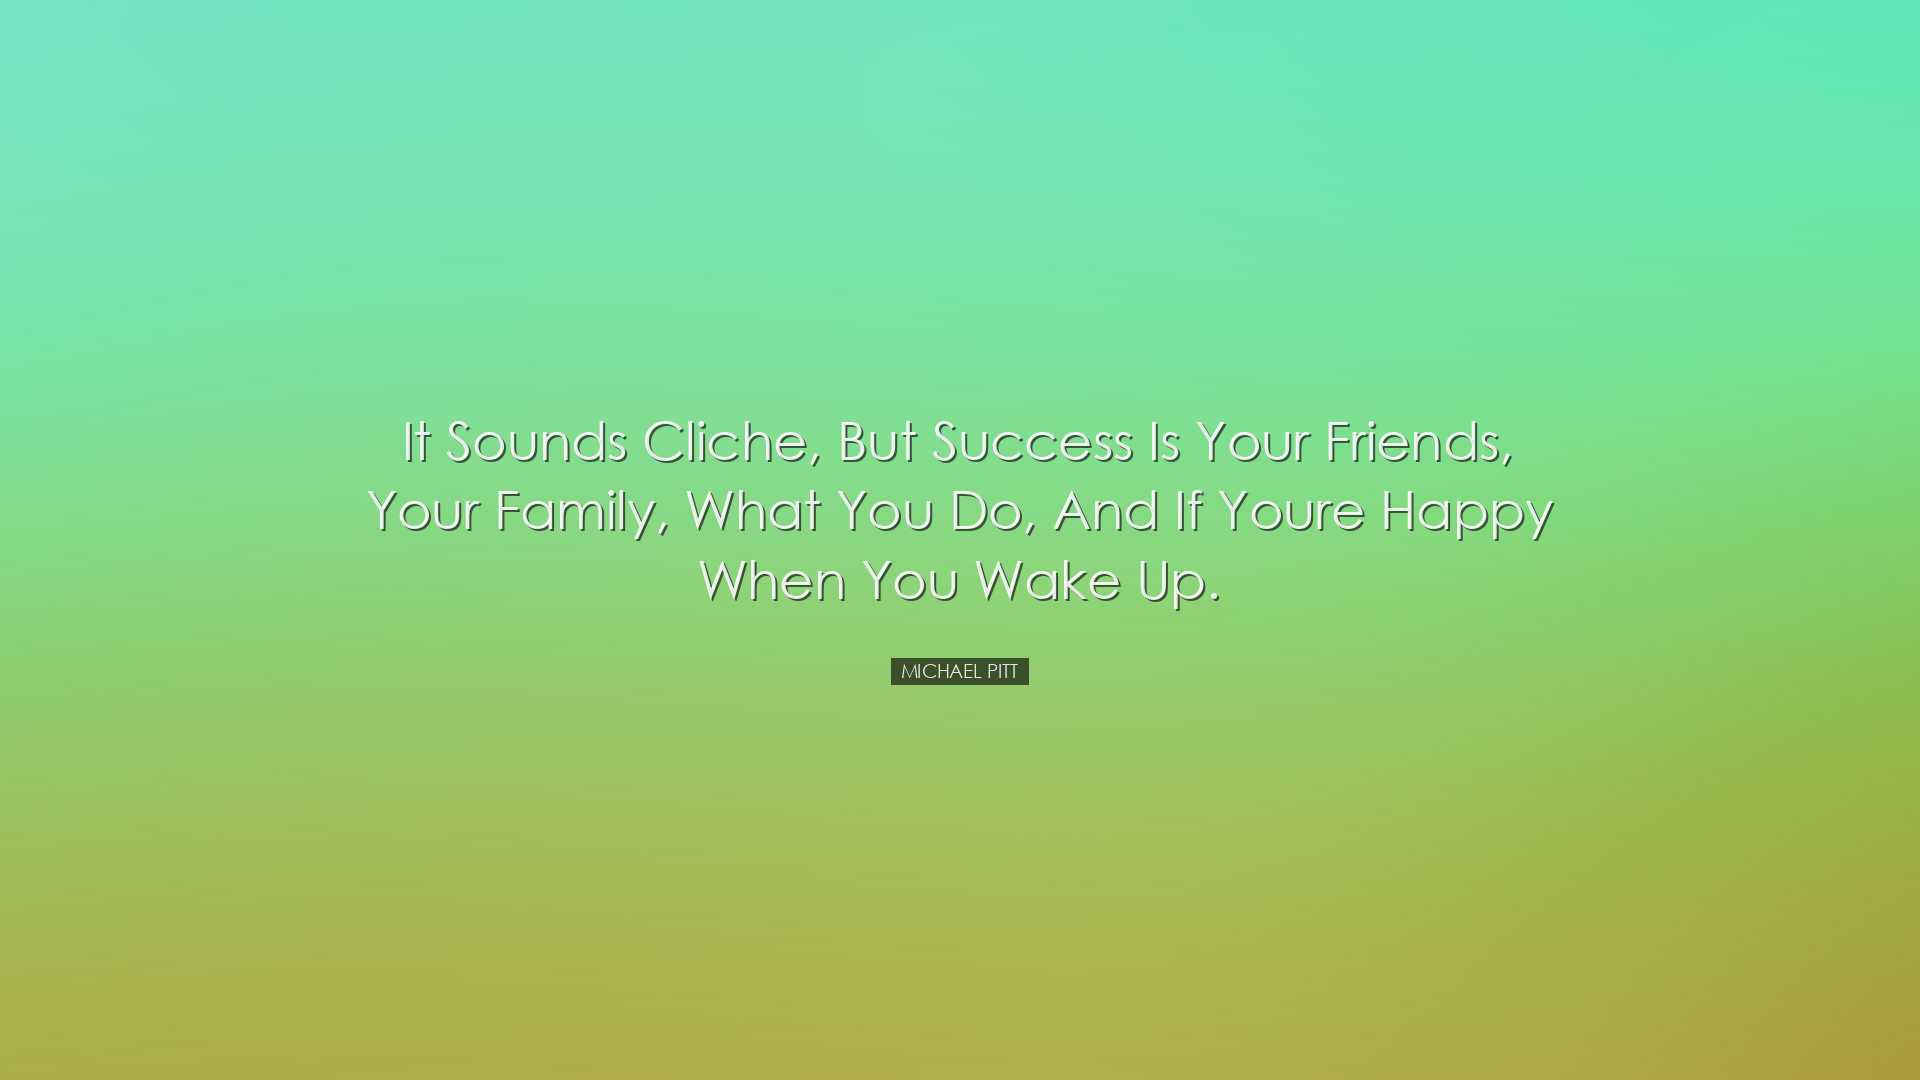 It sounds cliche, but success is your friends, your family, what y